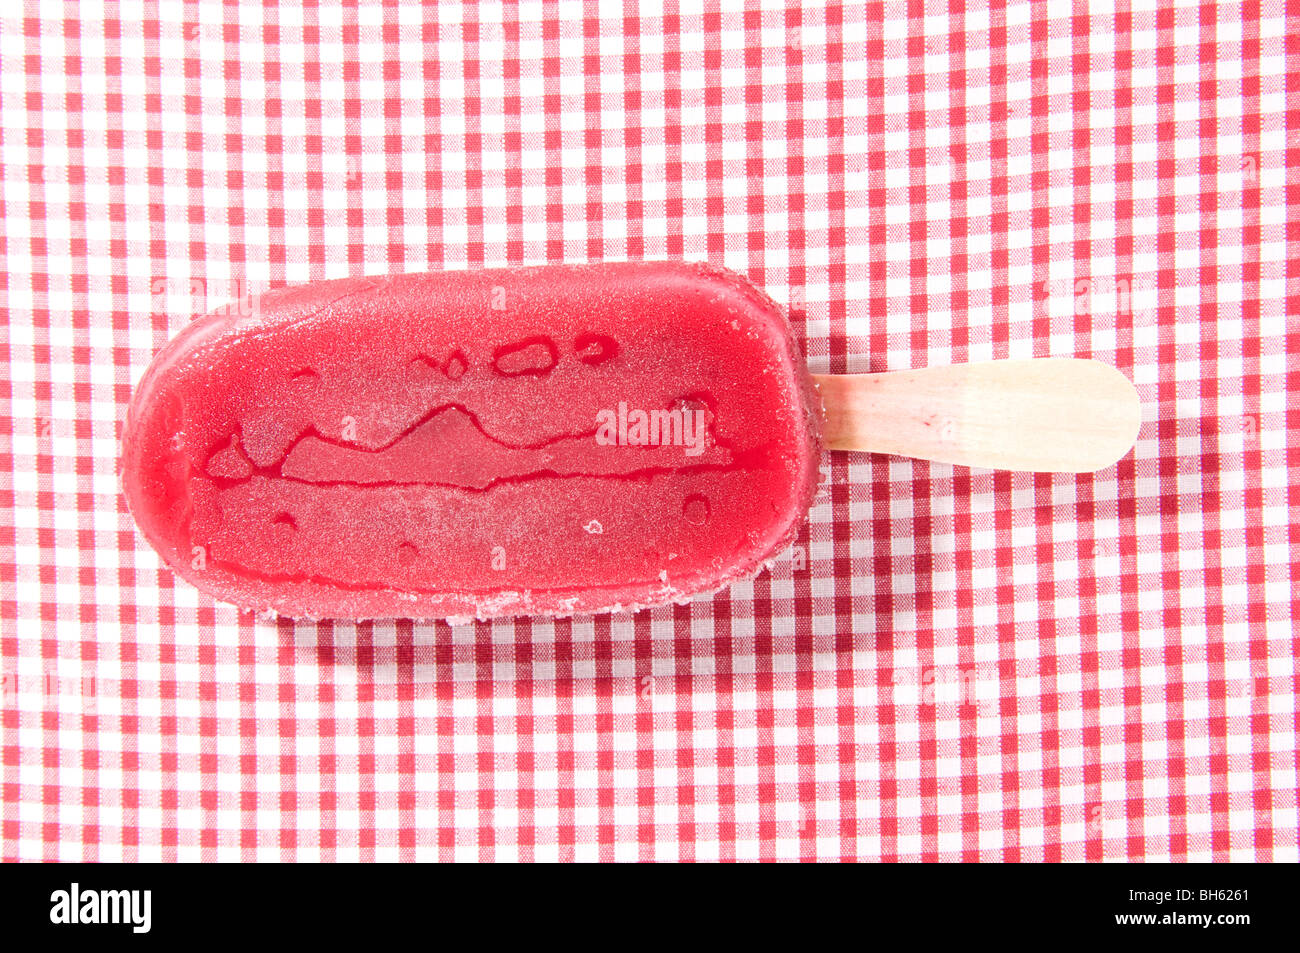 Ice Lolly On A Gingham Background Stock Photo